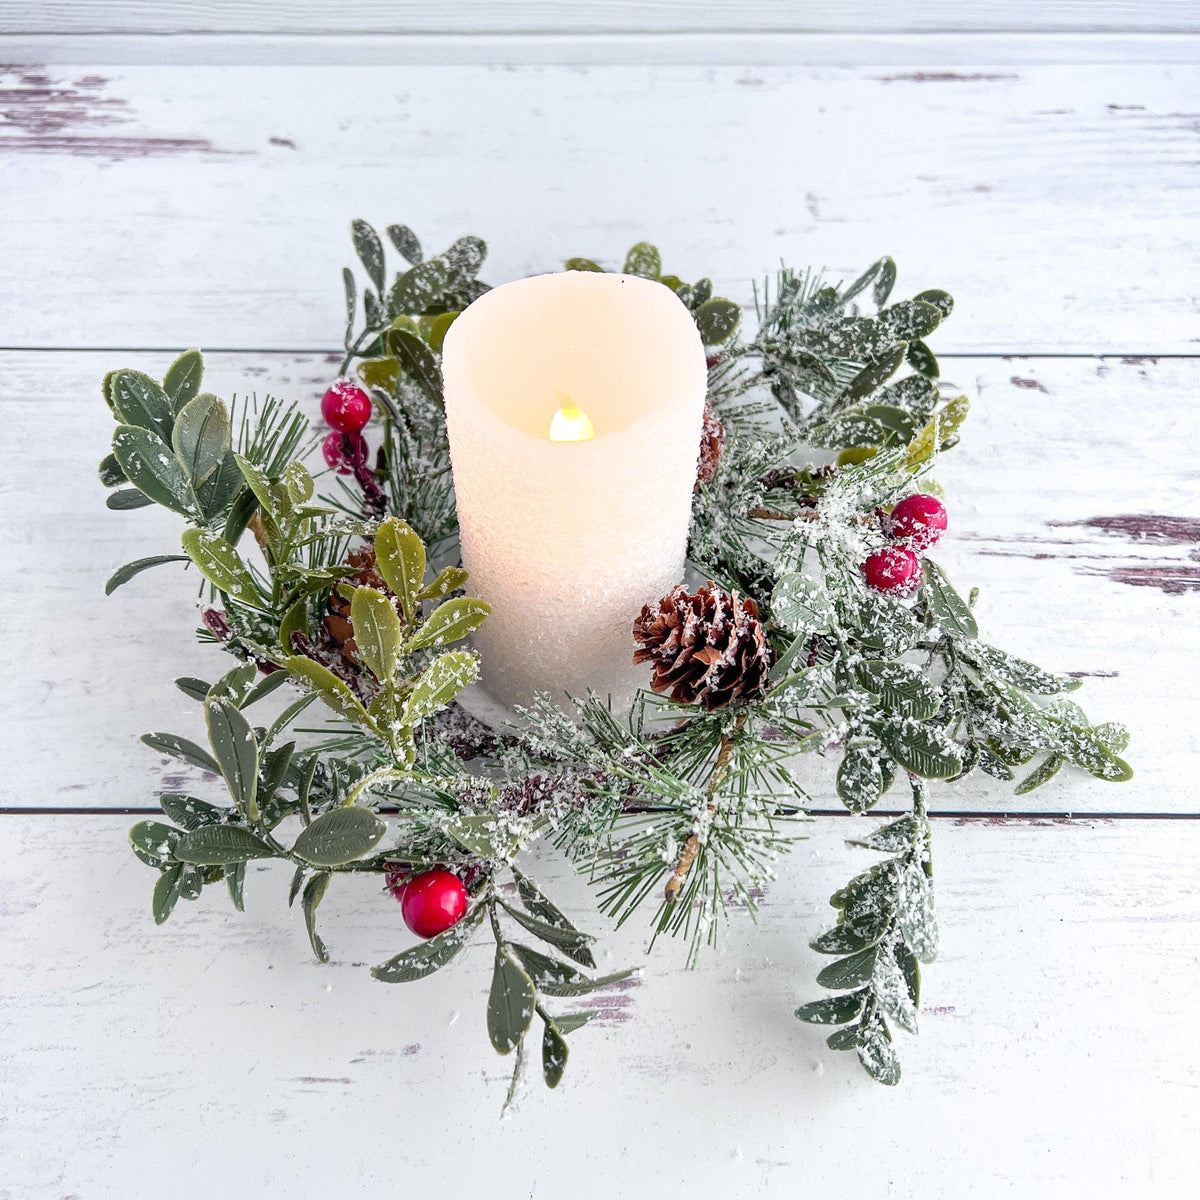 a lit candle surrounded by greenery and berries